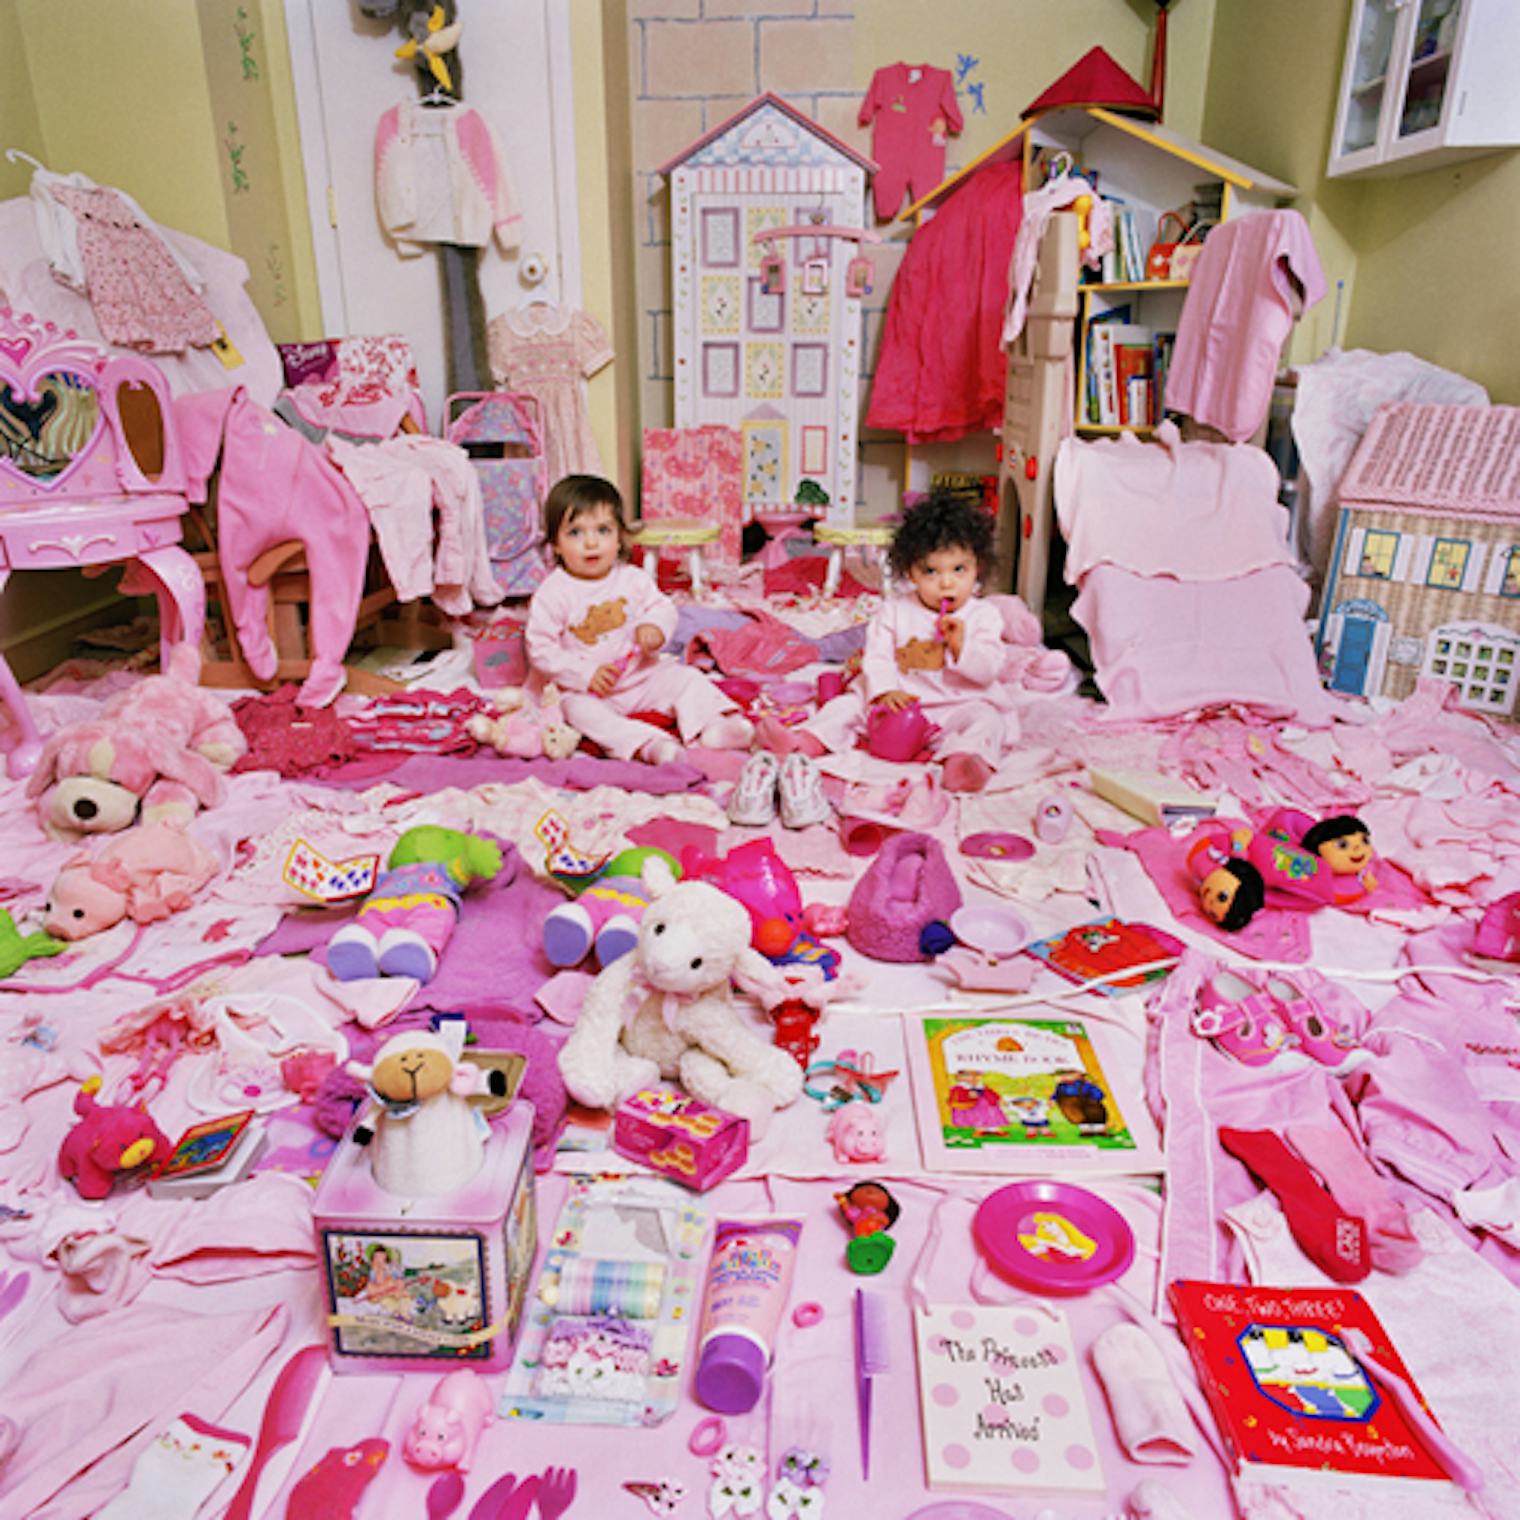 JeongMee Yoon’s “Pink and Blue Project” Photo Series Examines Gendered ...